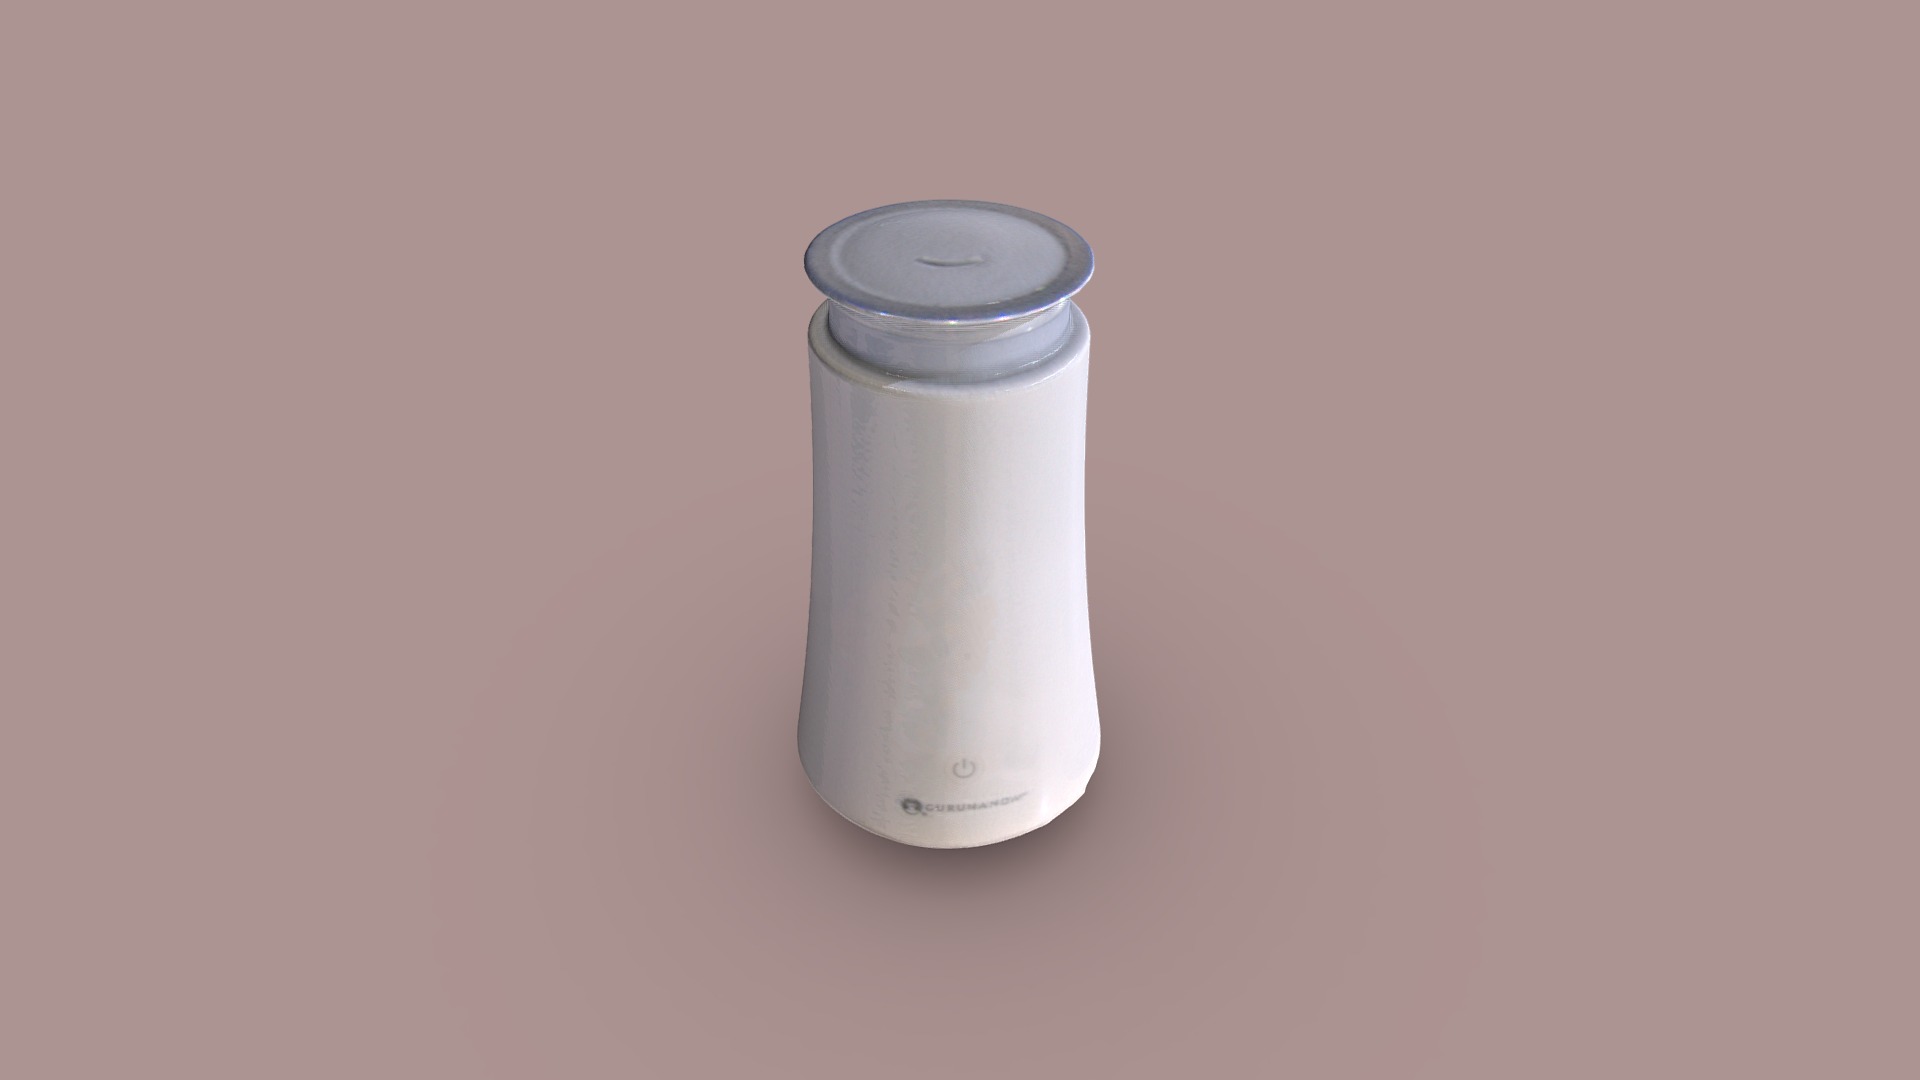 3D model Essential Oil Diffuser Tower Aromatherapy - This is a 3D model of the Essential Oil Diffuser Tower Aromatherapy. The 3D model is about a white cylindrical object.